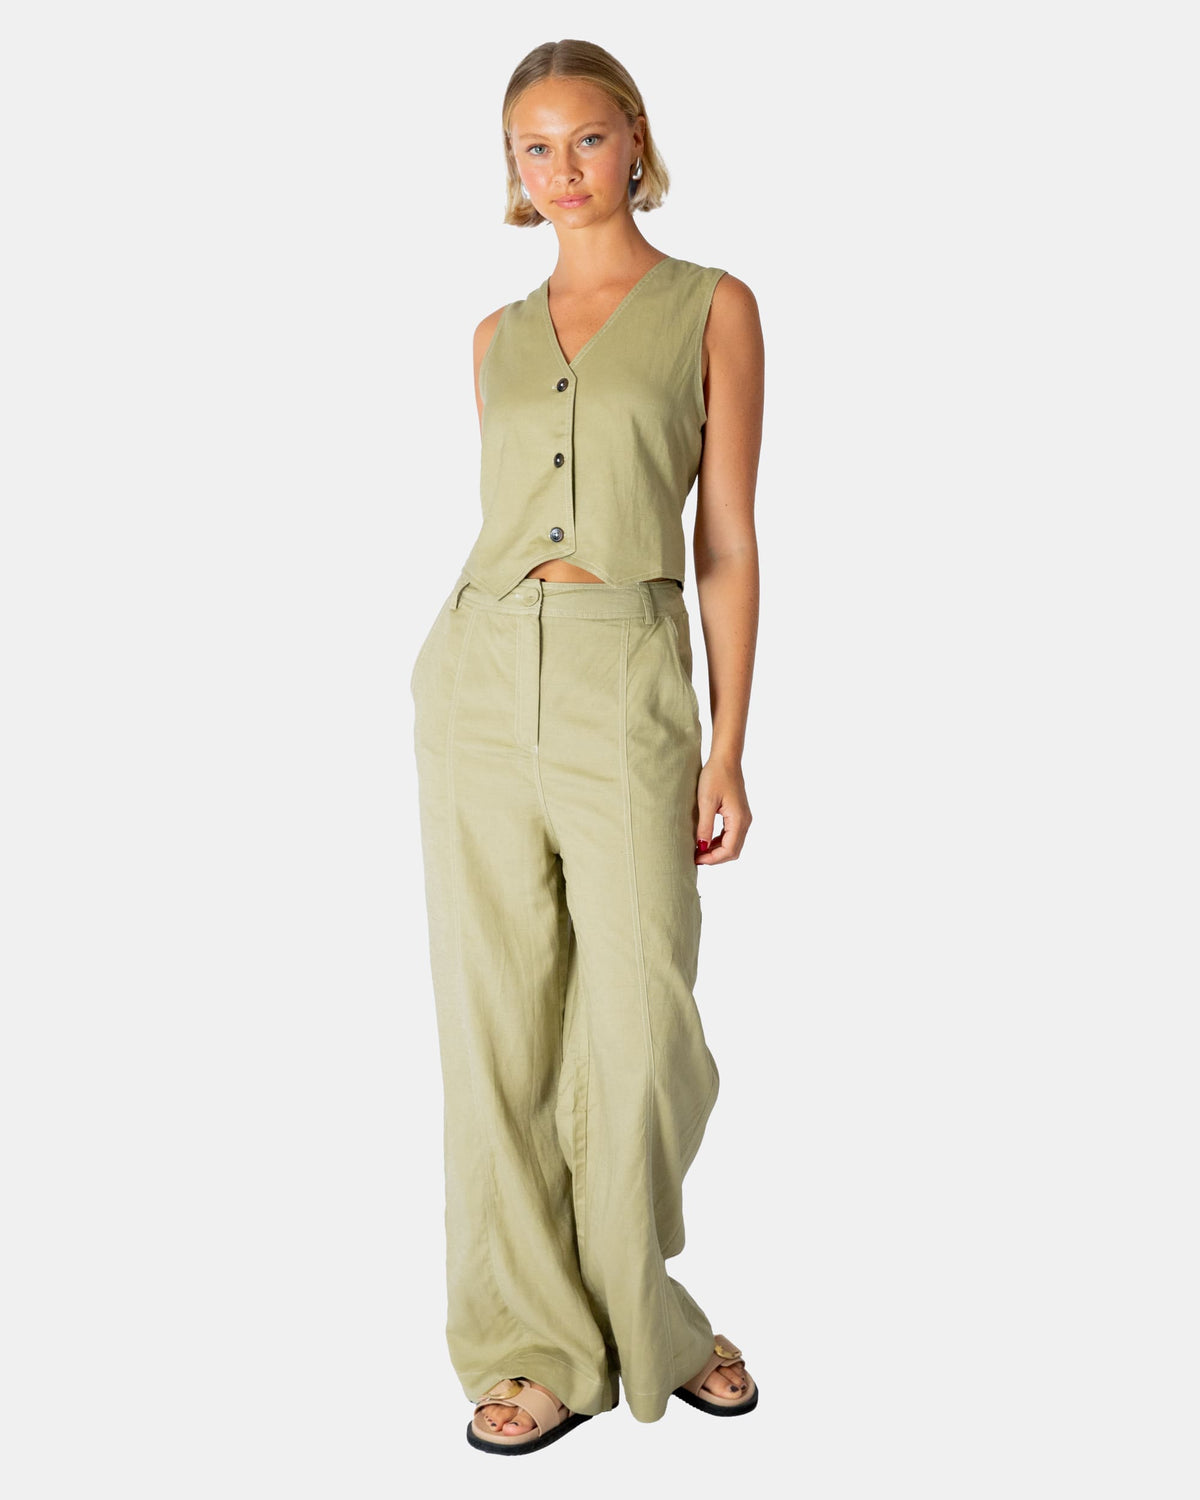 OLIVE CONTRAST STITCH CO-ORD TROUSERS